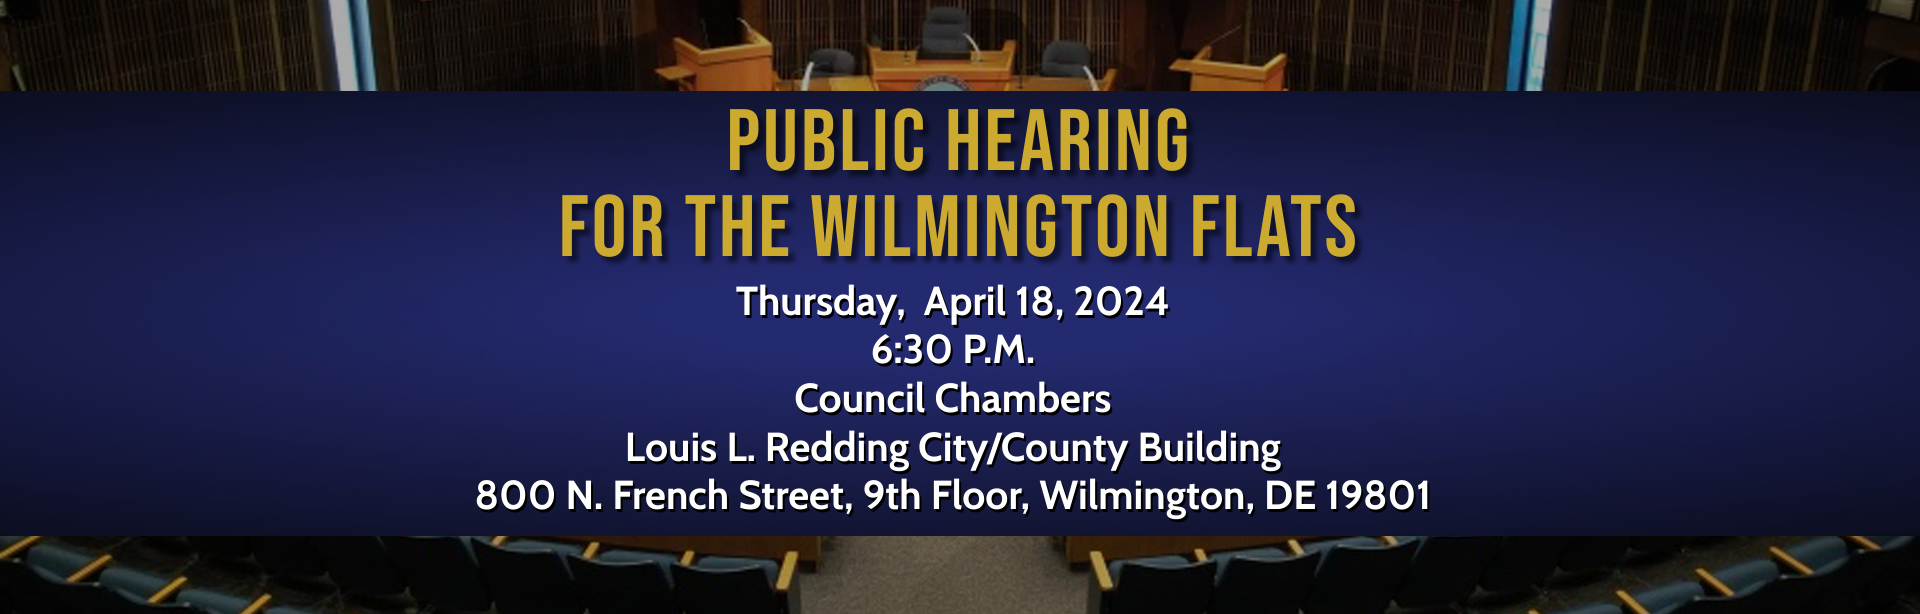 Banner for Wilminton Flats Public Hearing